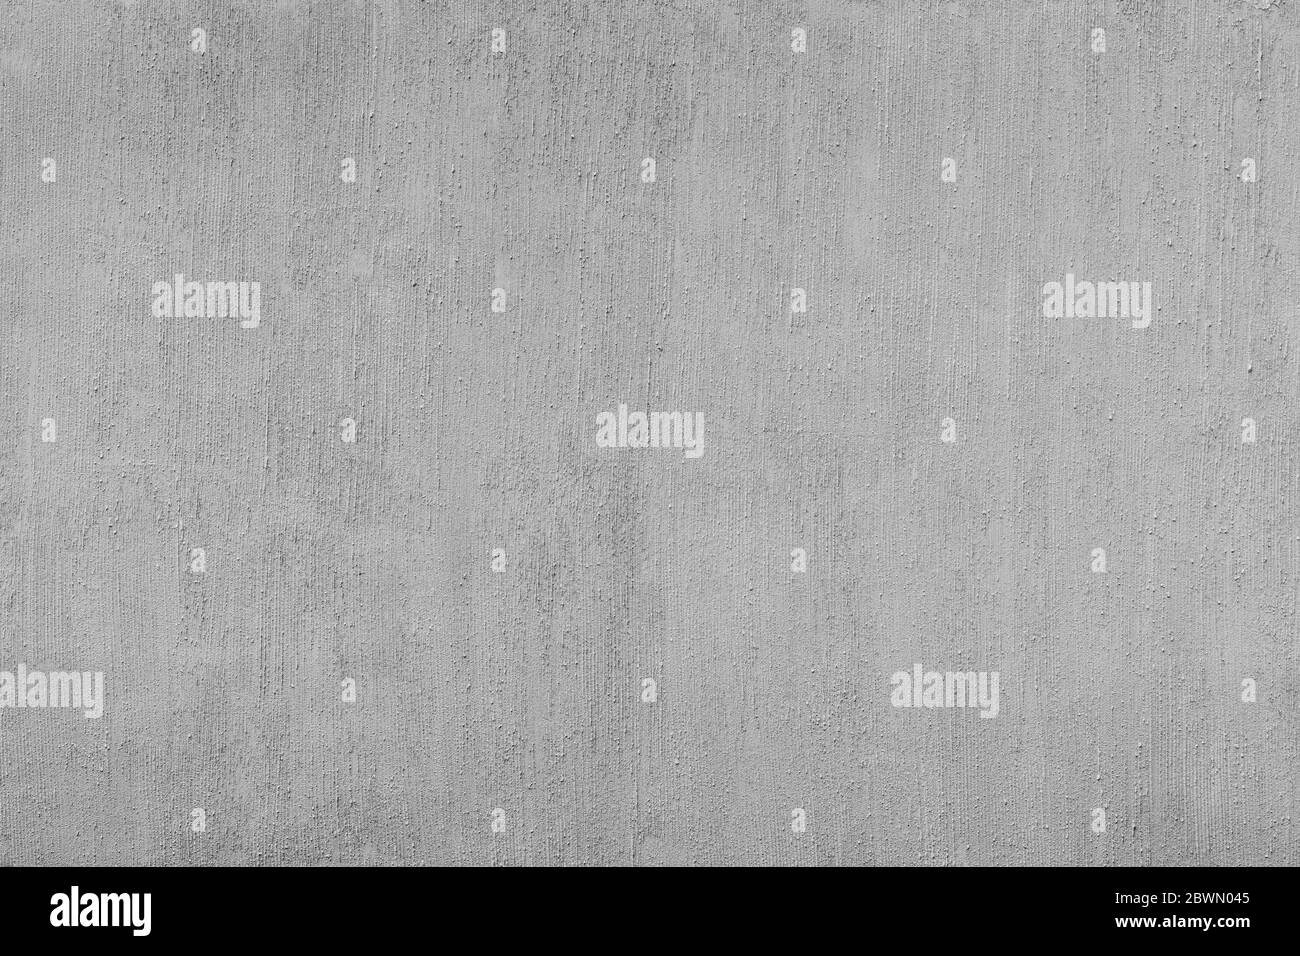 Concrete wall or cement panel with artistic detail of hand line art deco stroke scratch pattern textured architecture background. Stock Photo